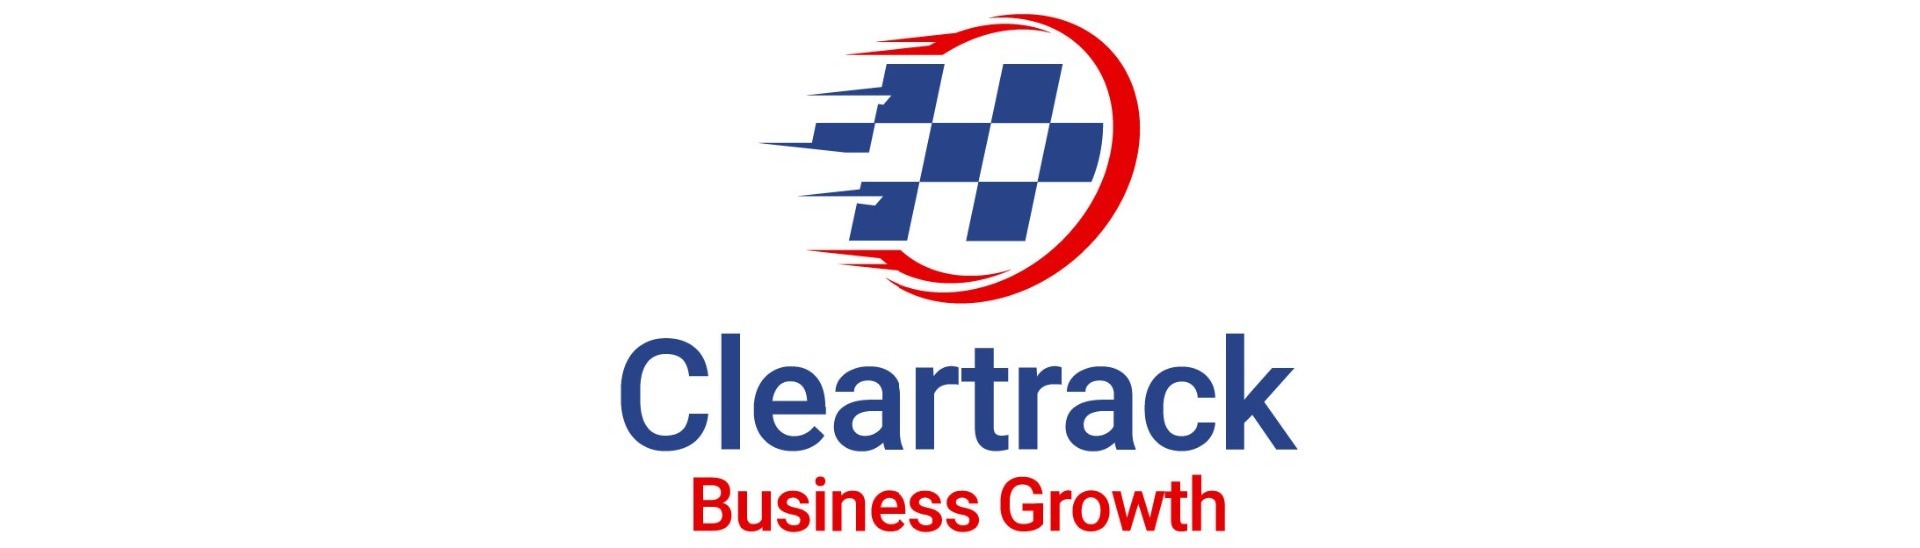 ClearTrack Business Growth